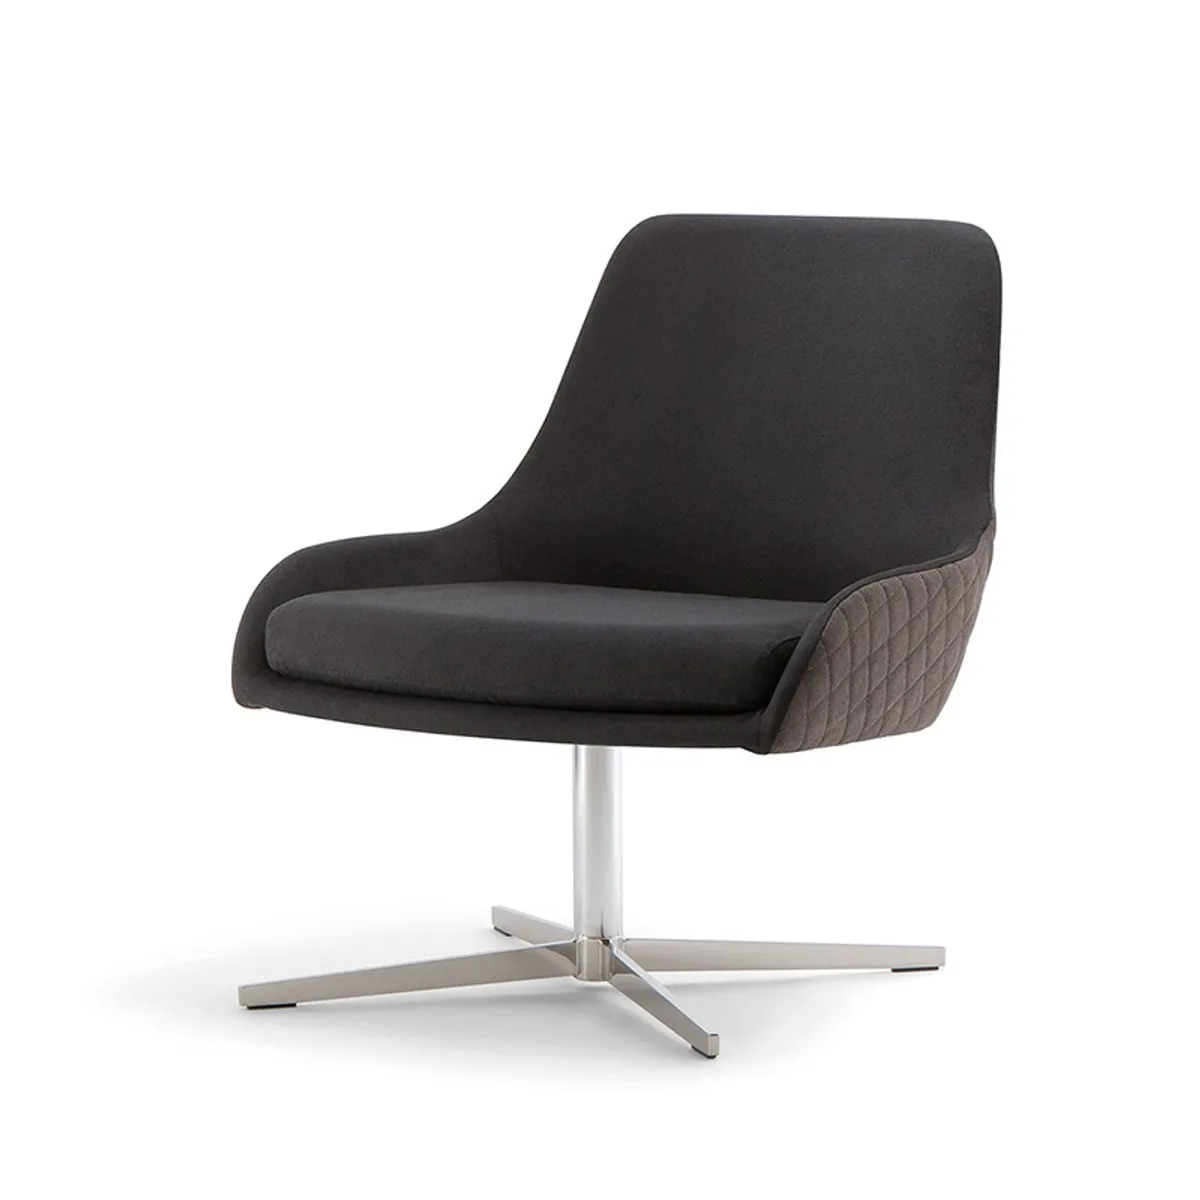 Josie 3 Lounge Chair Furniture With Upholstery And Metal Base